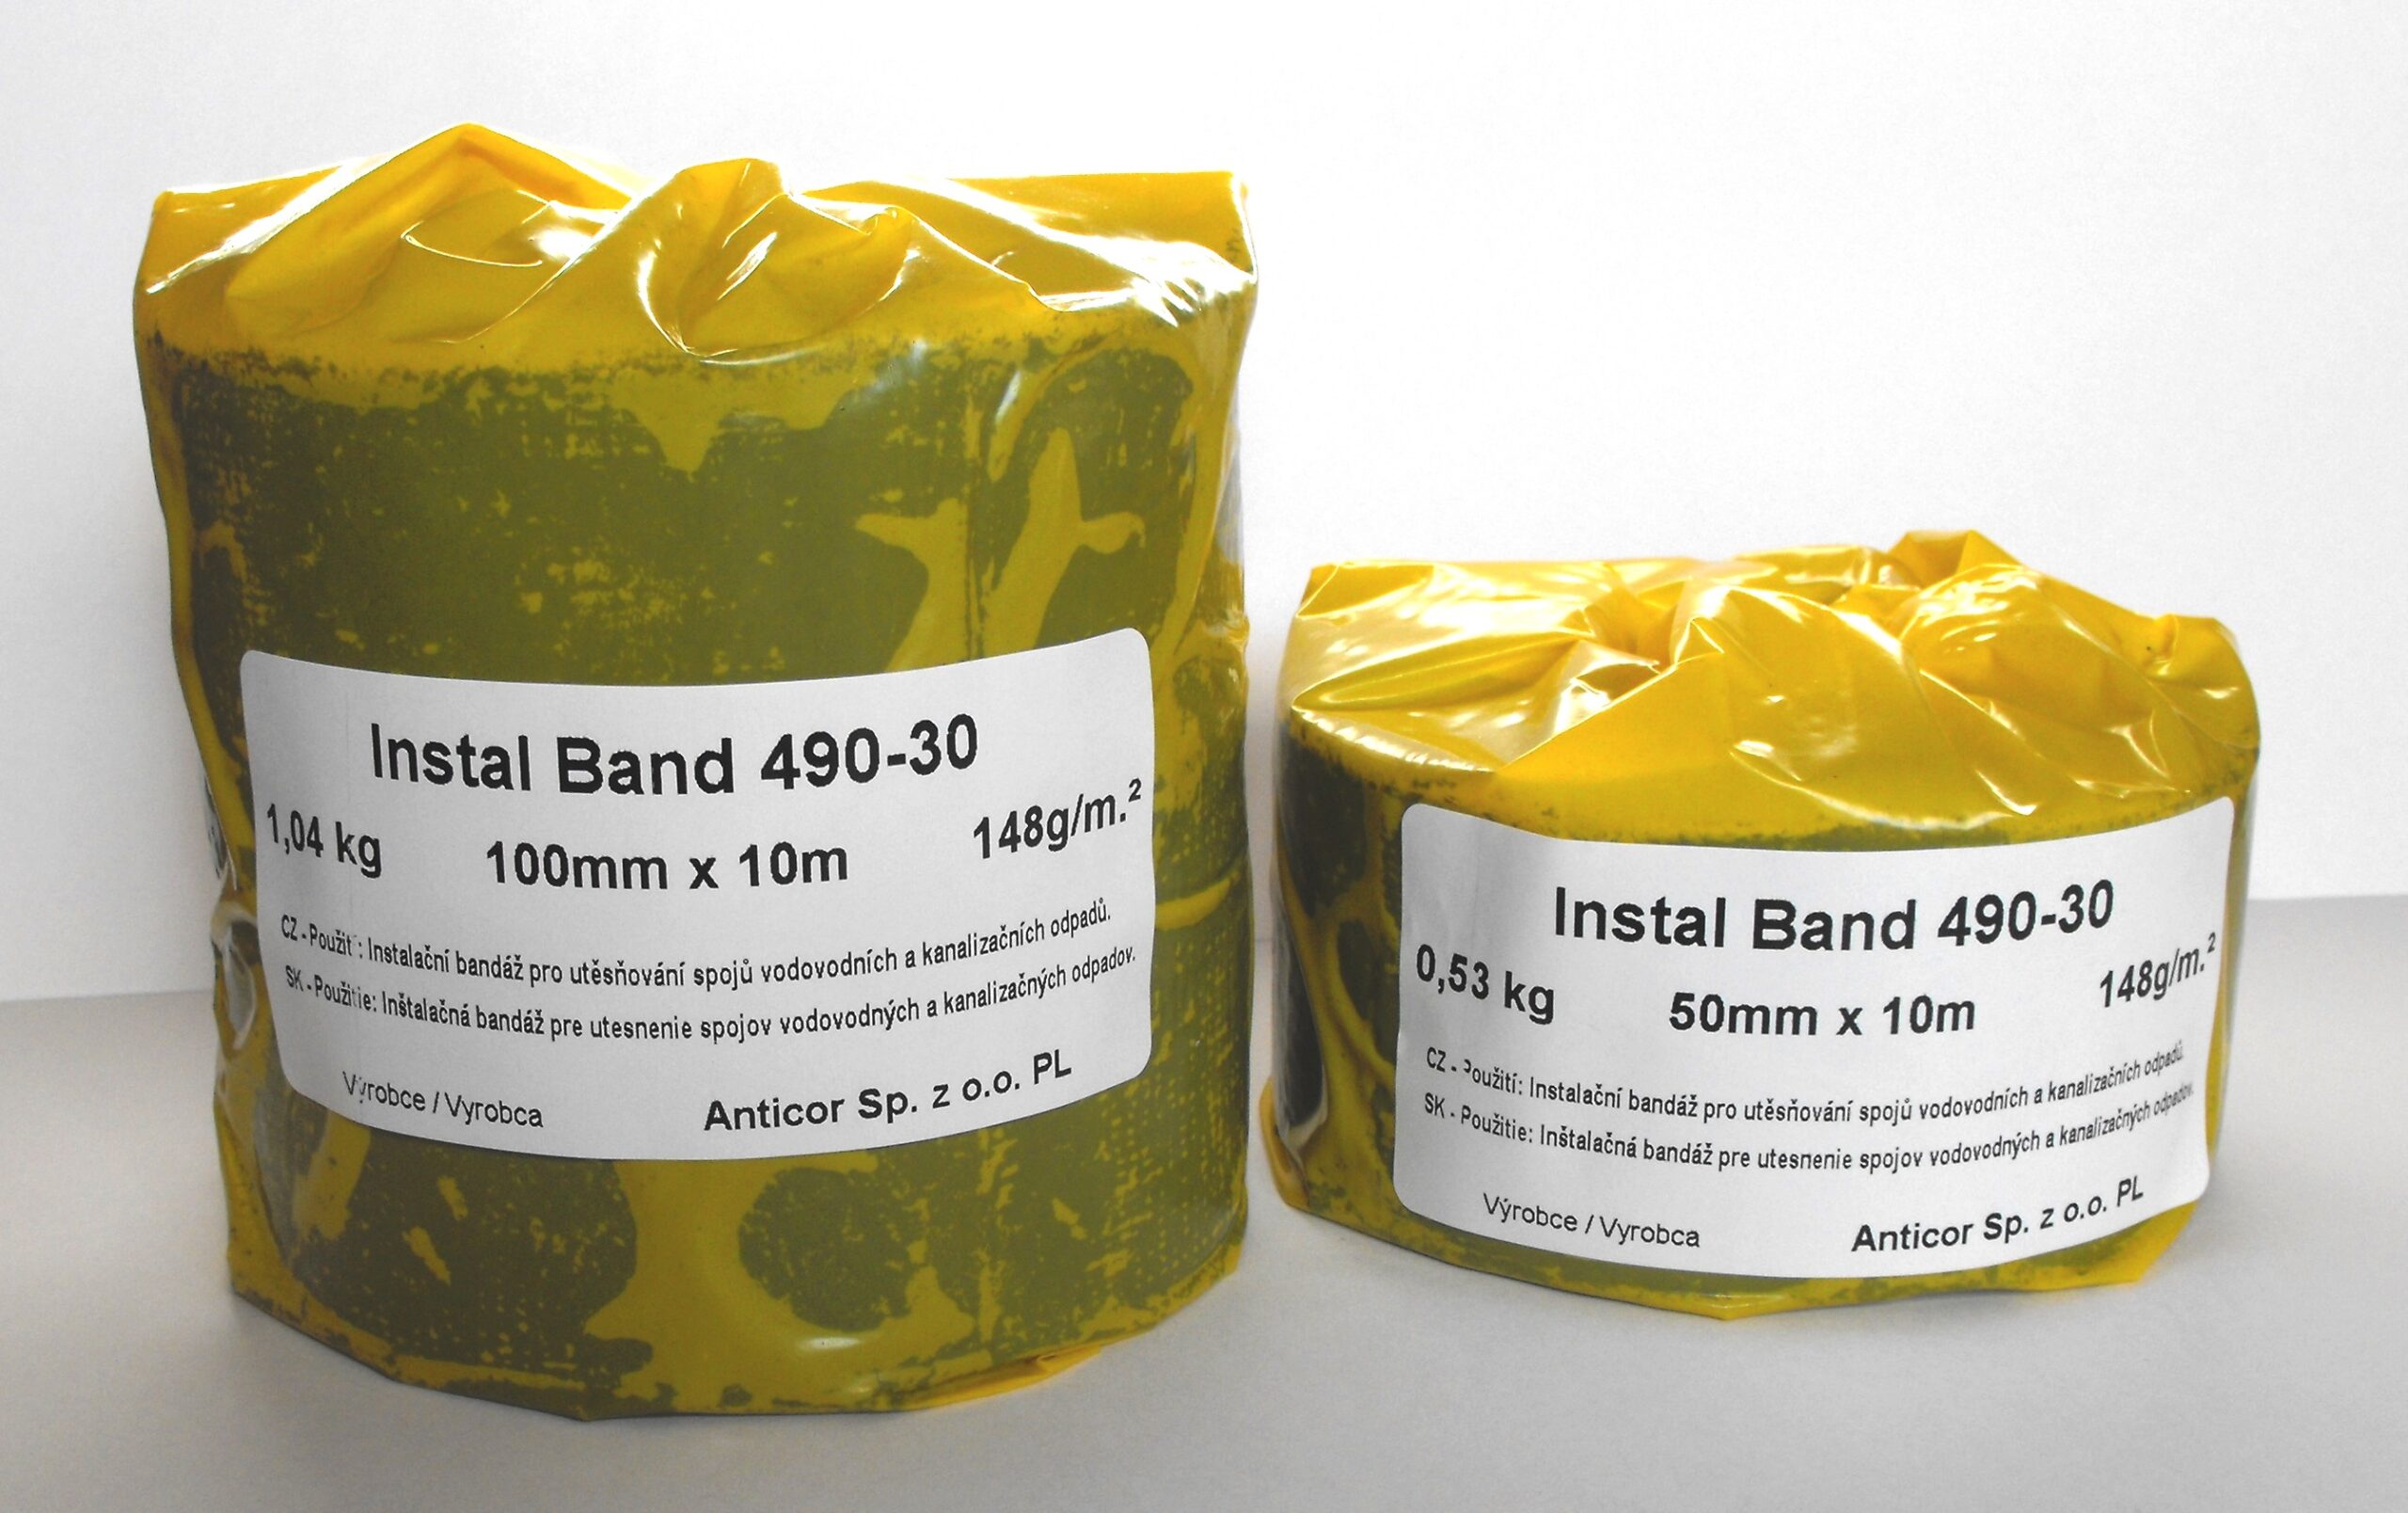 Instal Band 490-30 – Corrosion Protection System